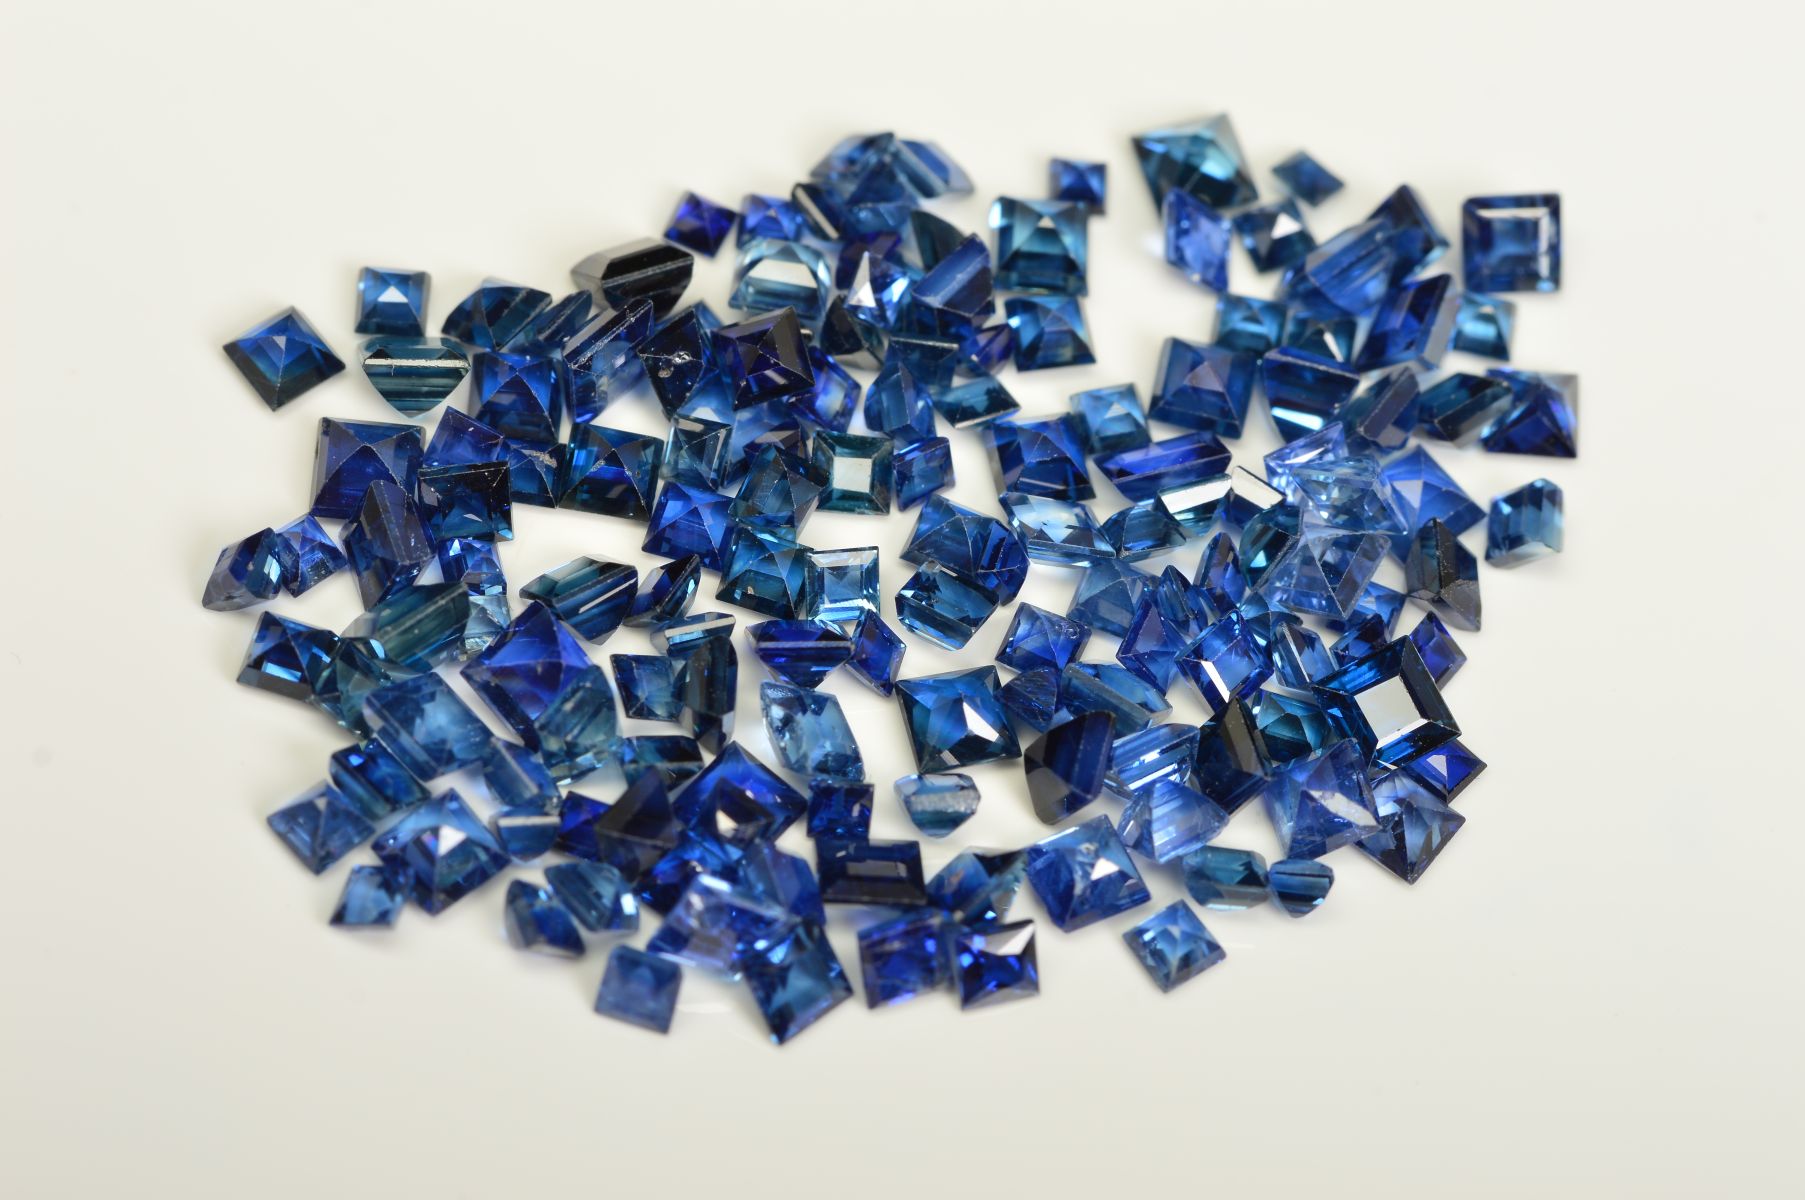 A SELECTION OF SQUARE CUT SAPPHIRES, ranging between 2-3.5mm, approximate combined weight 29.18cts